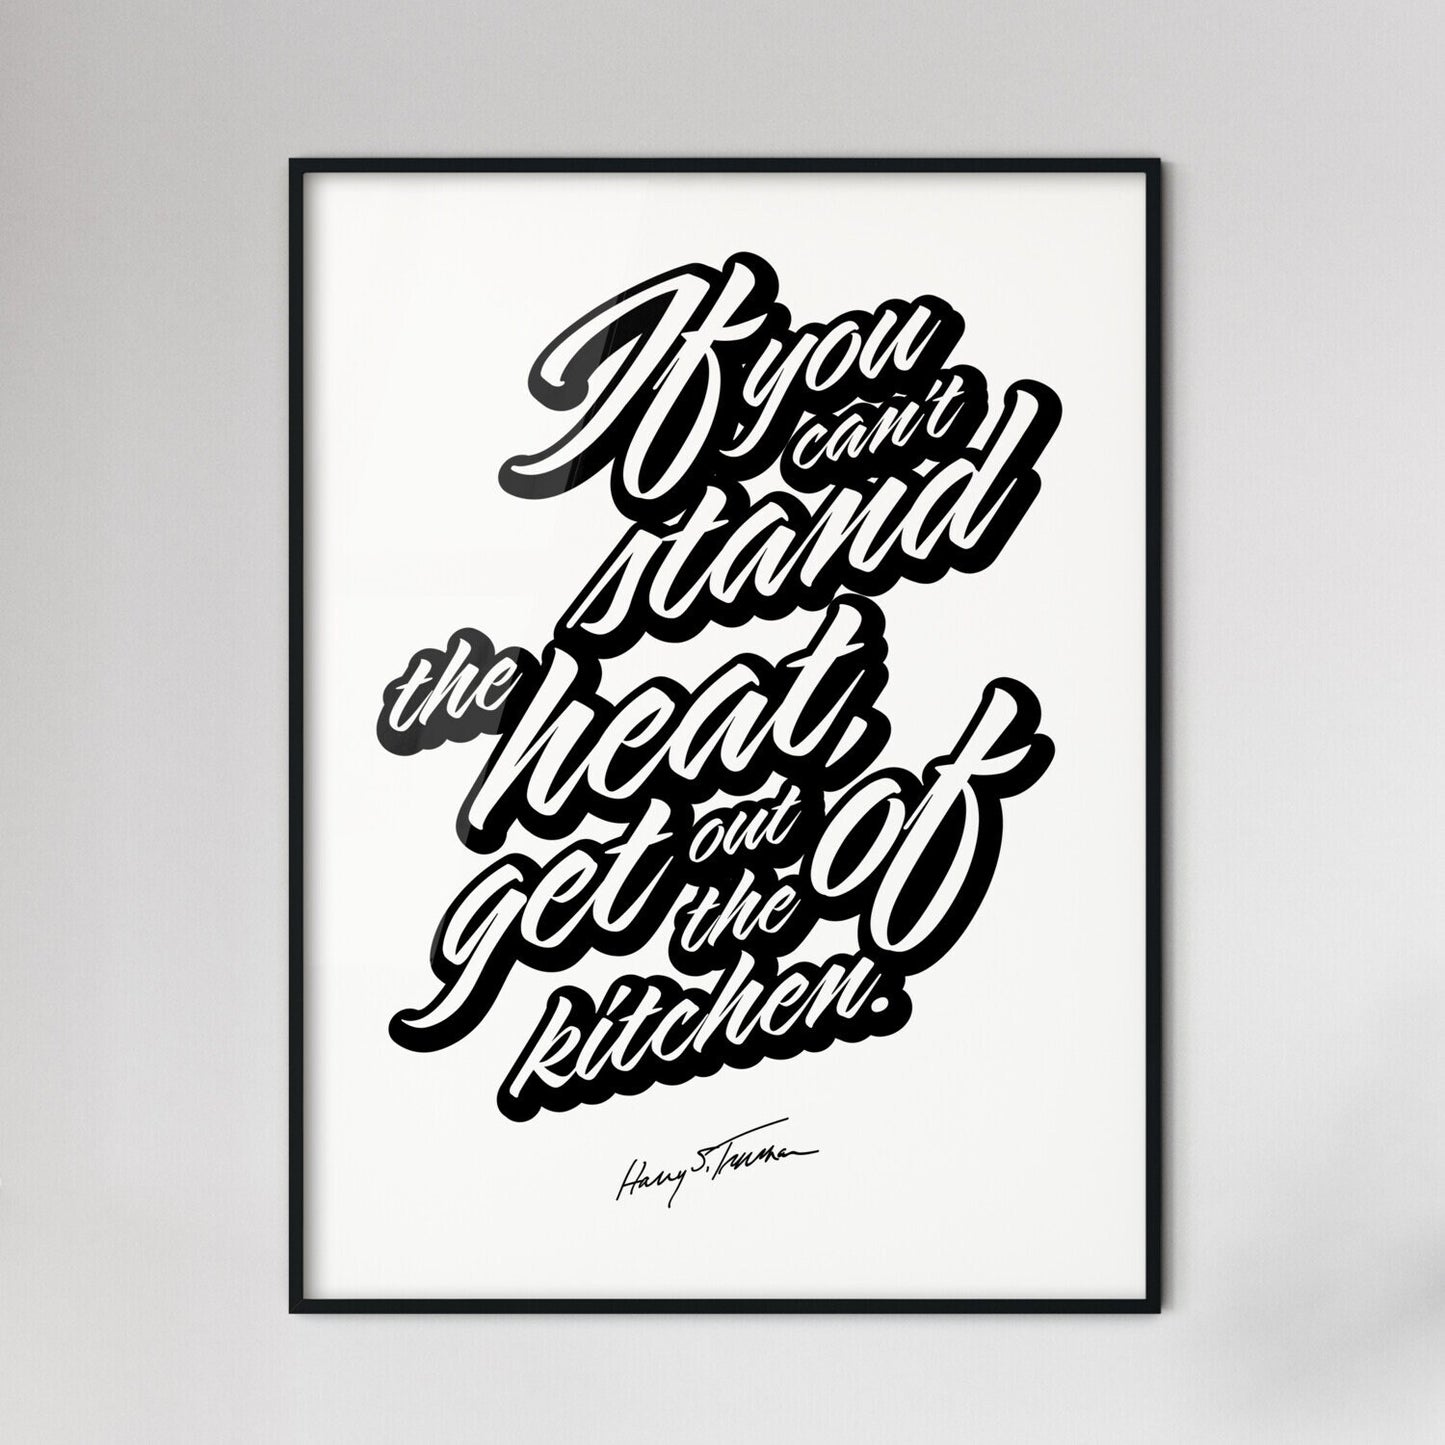 If You Cant Stand The Heat, Get Out Of The Kitchen Lettering Poster. Perfect print for patriots.